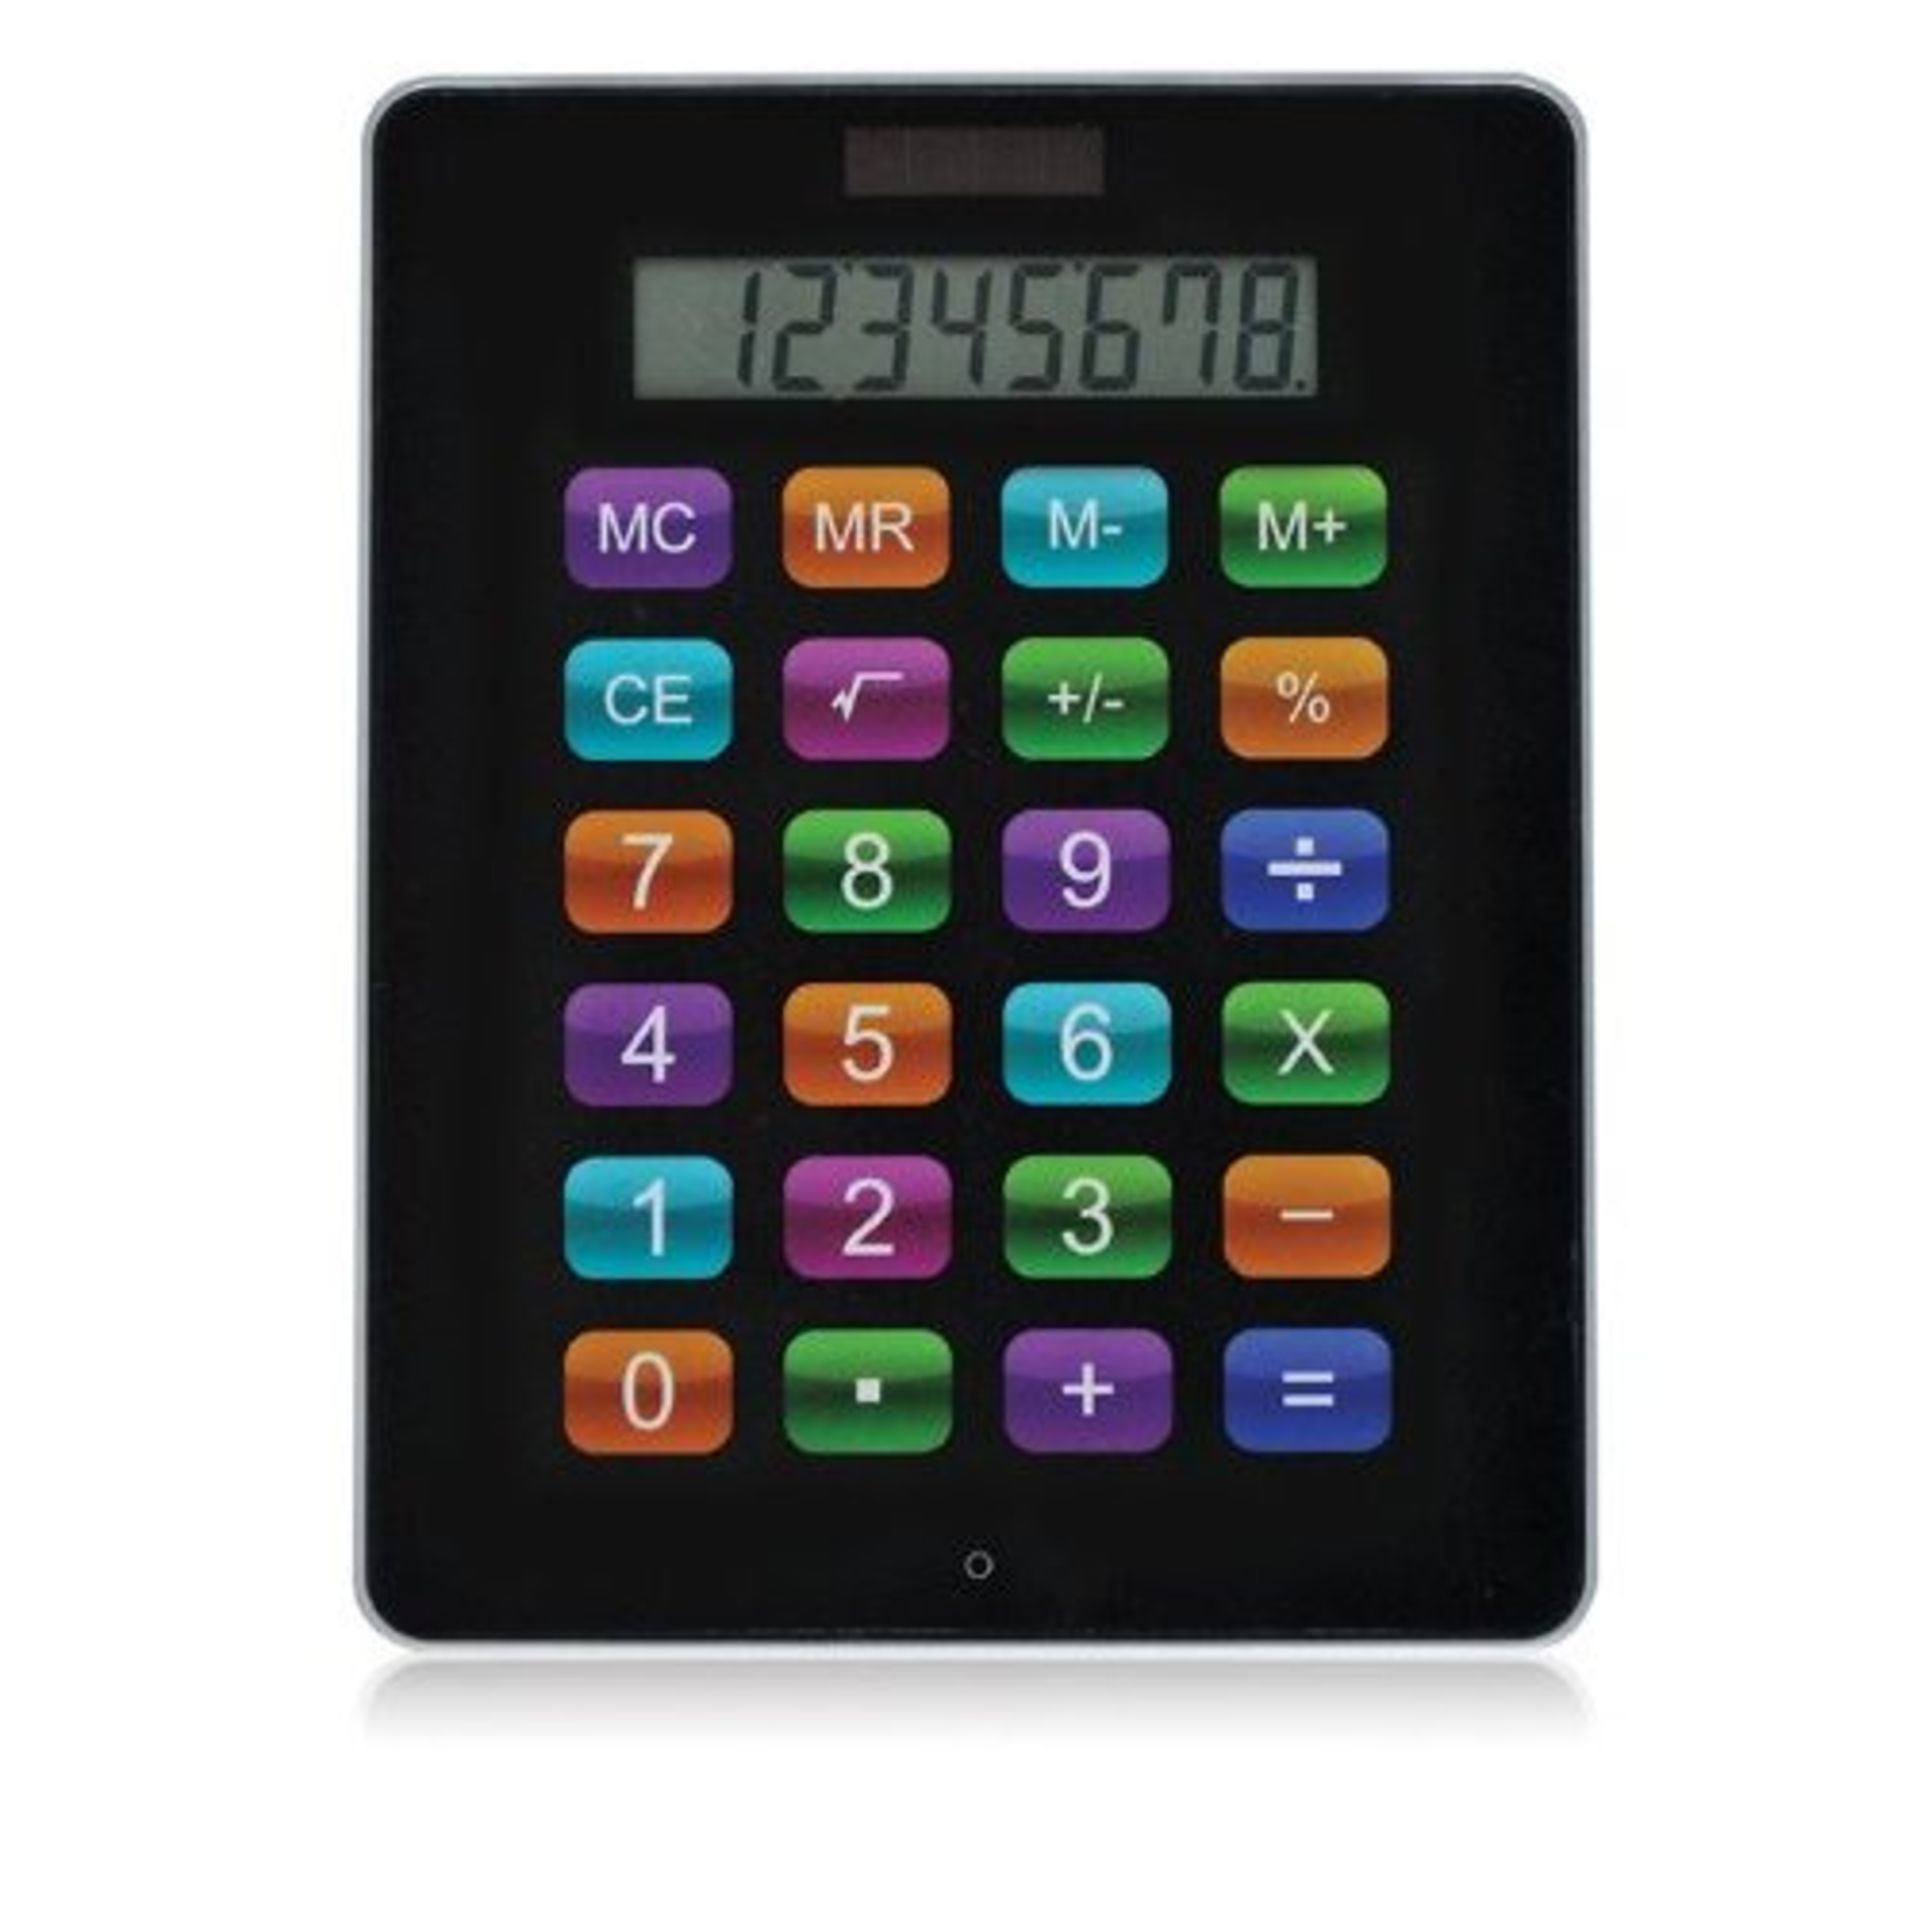 V Brand New Ipad Calculator-Battery powered with solar backup X 3 Bid price to be multiplied by